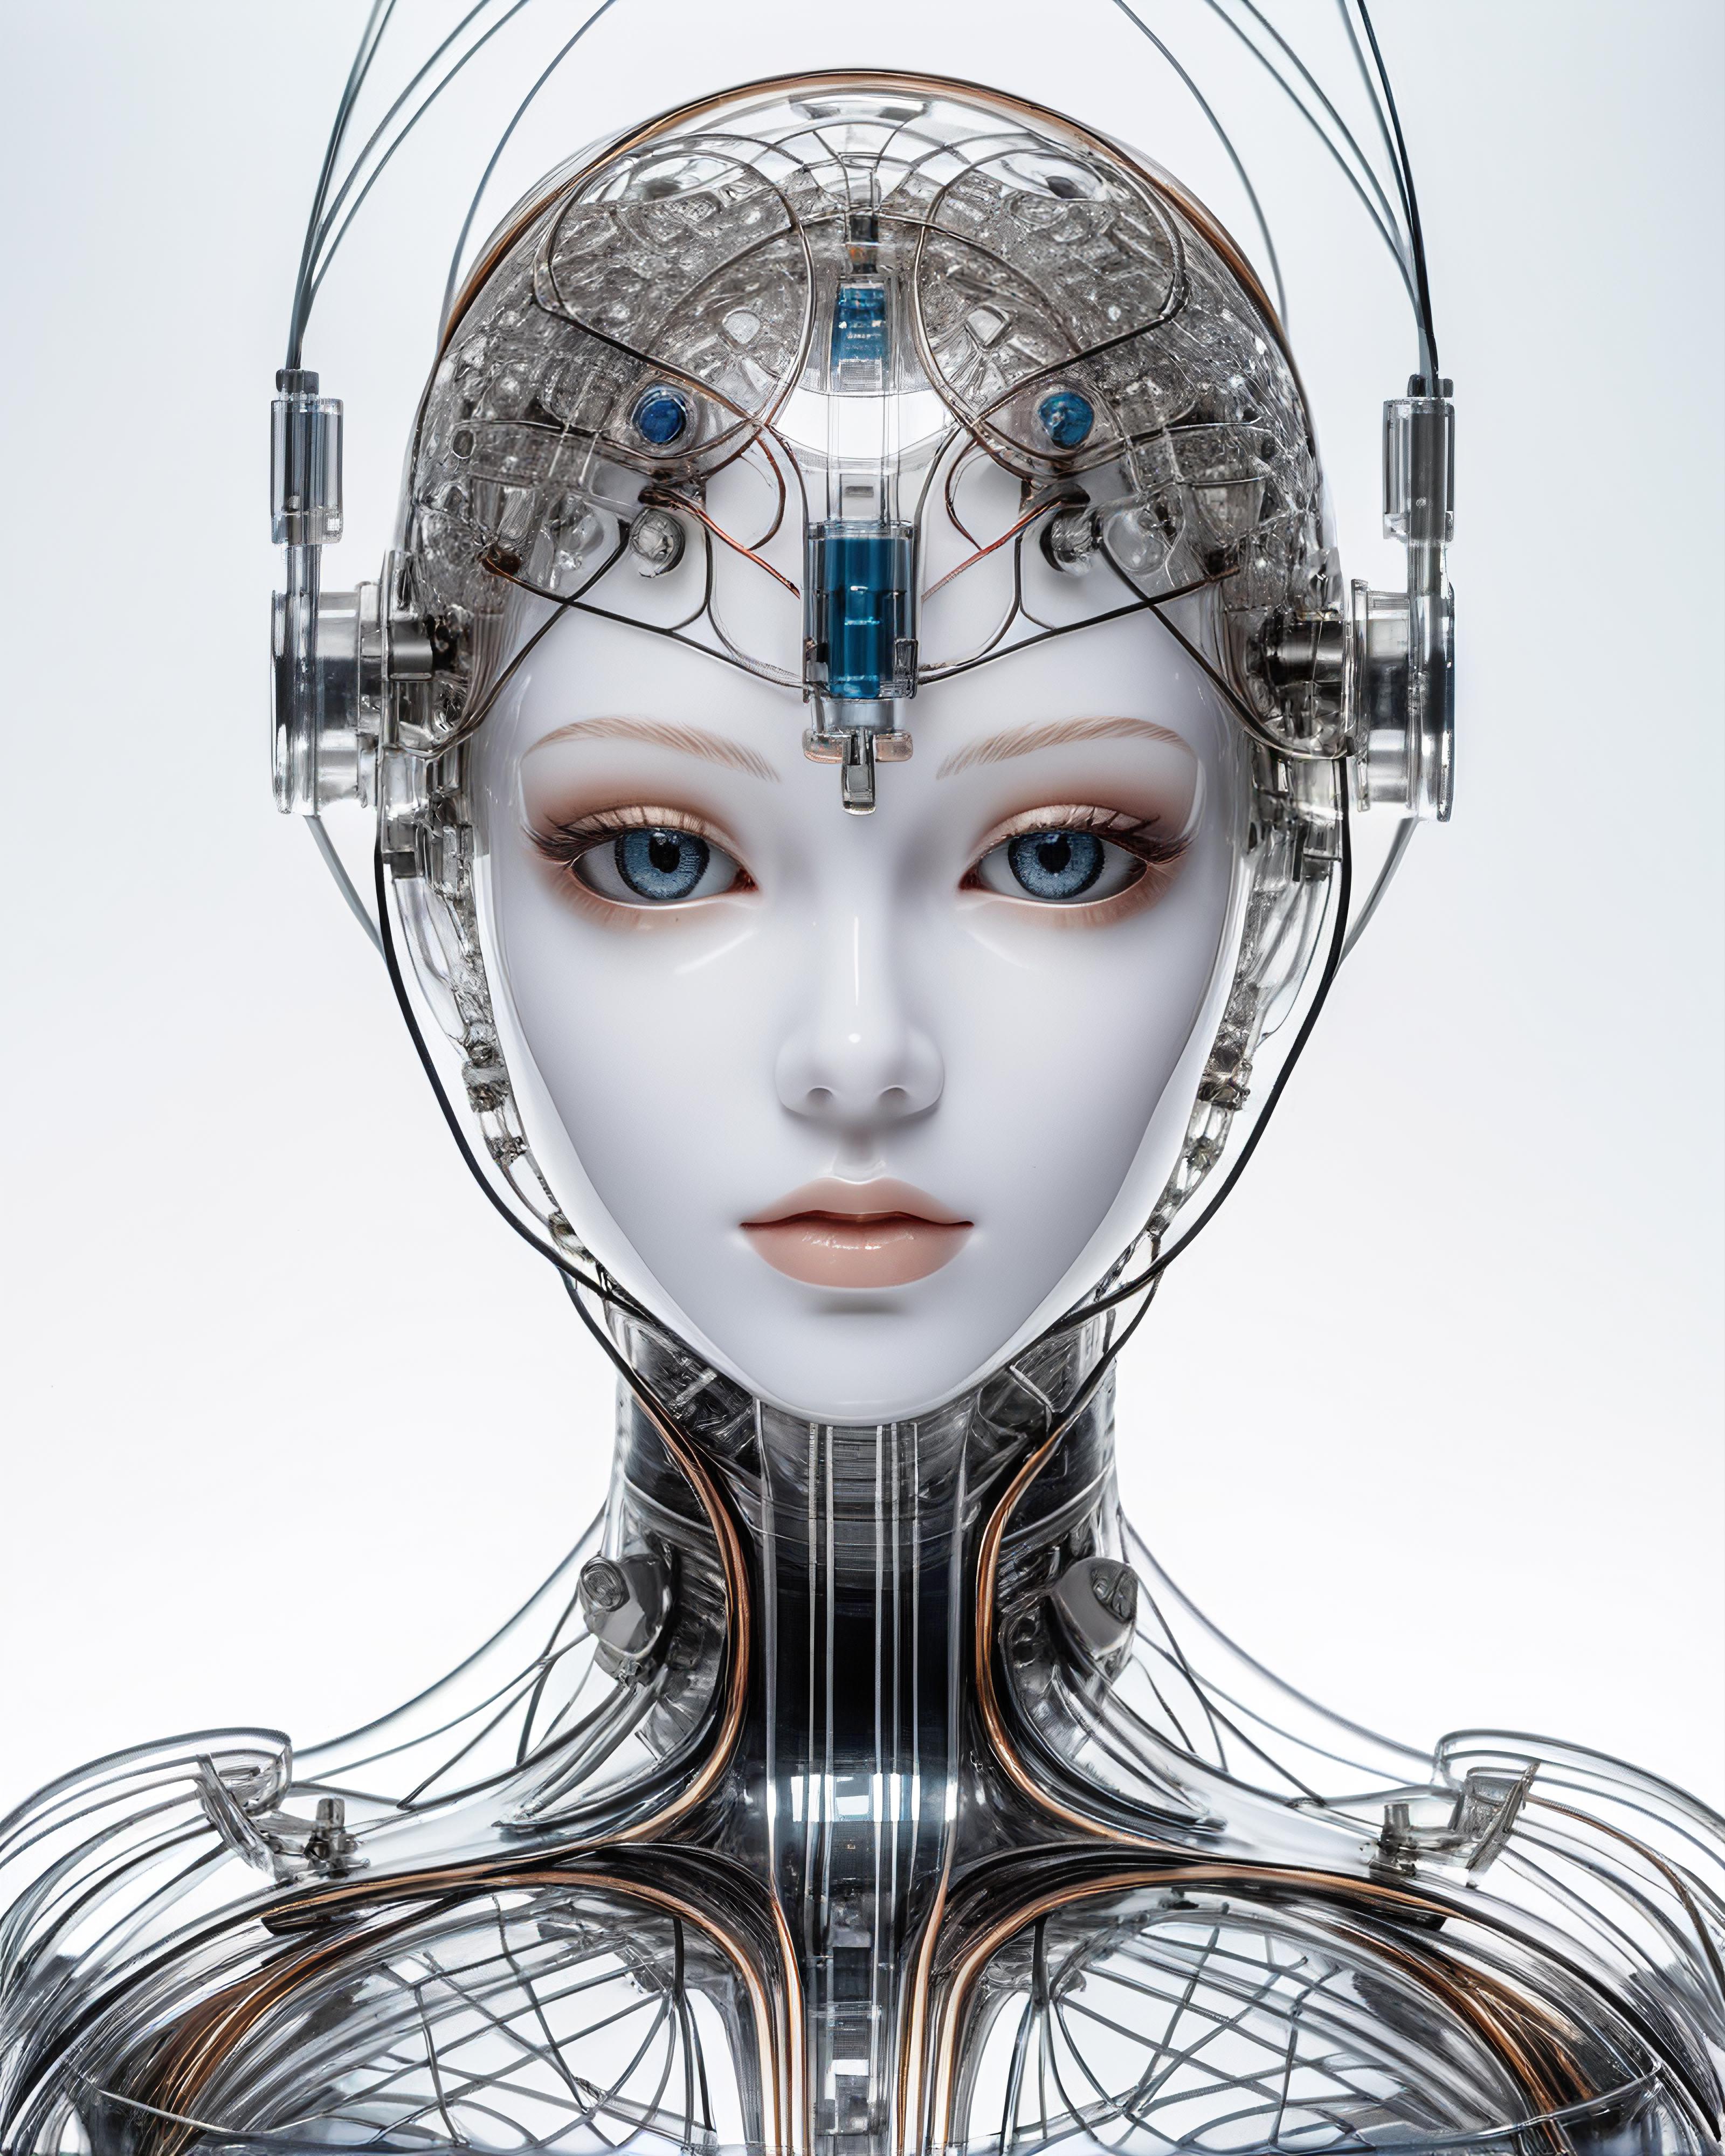 Futuristic Robot Doll with Blue Eyes, Wireframe Head, and Glowing Circuitry